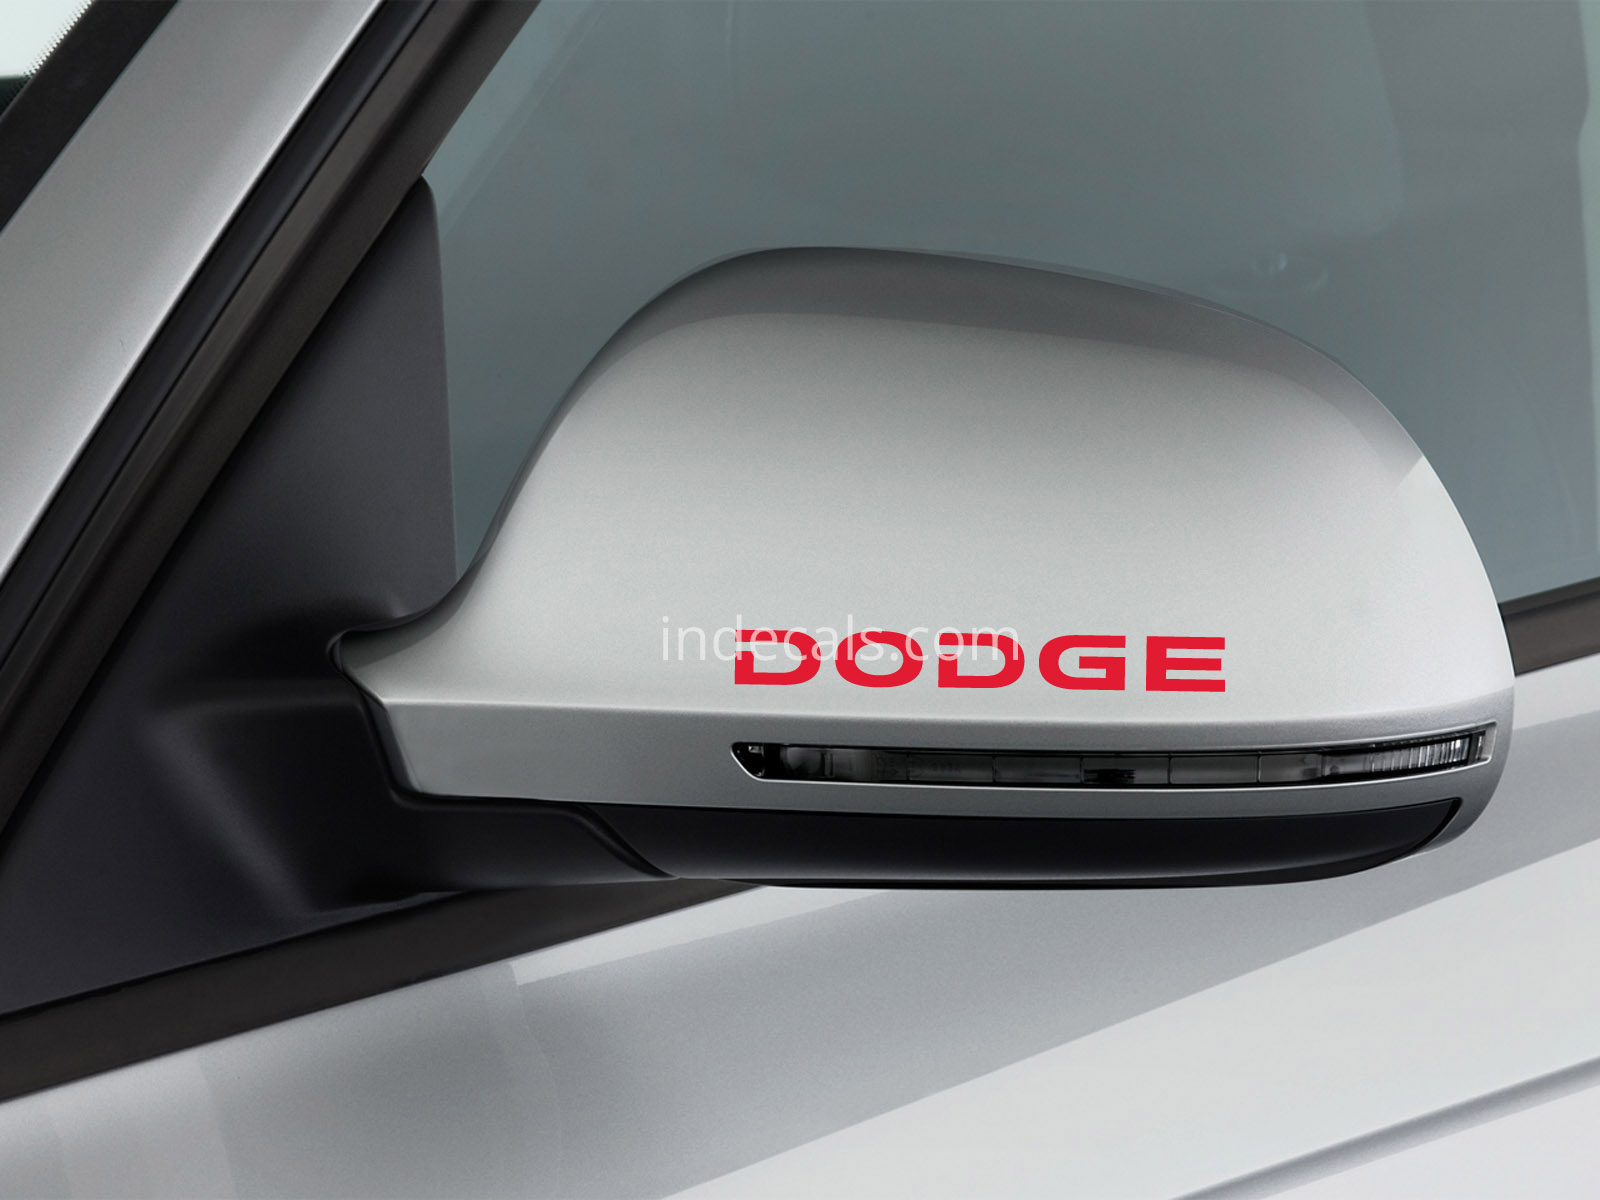 3 x Dodge Stickers for Mirrors - White